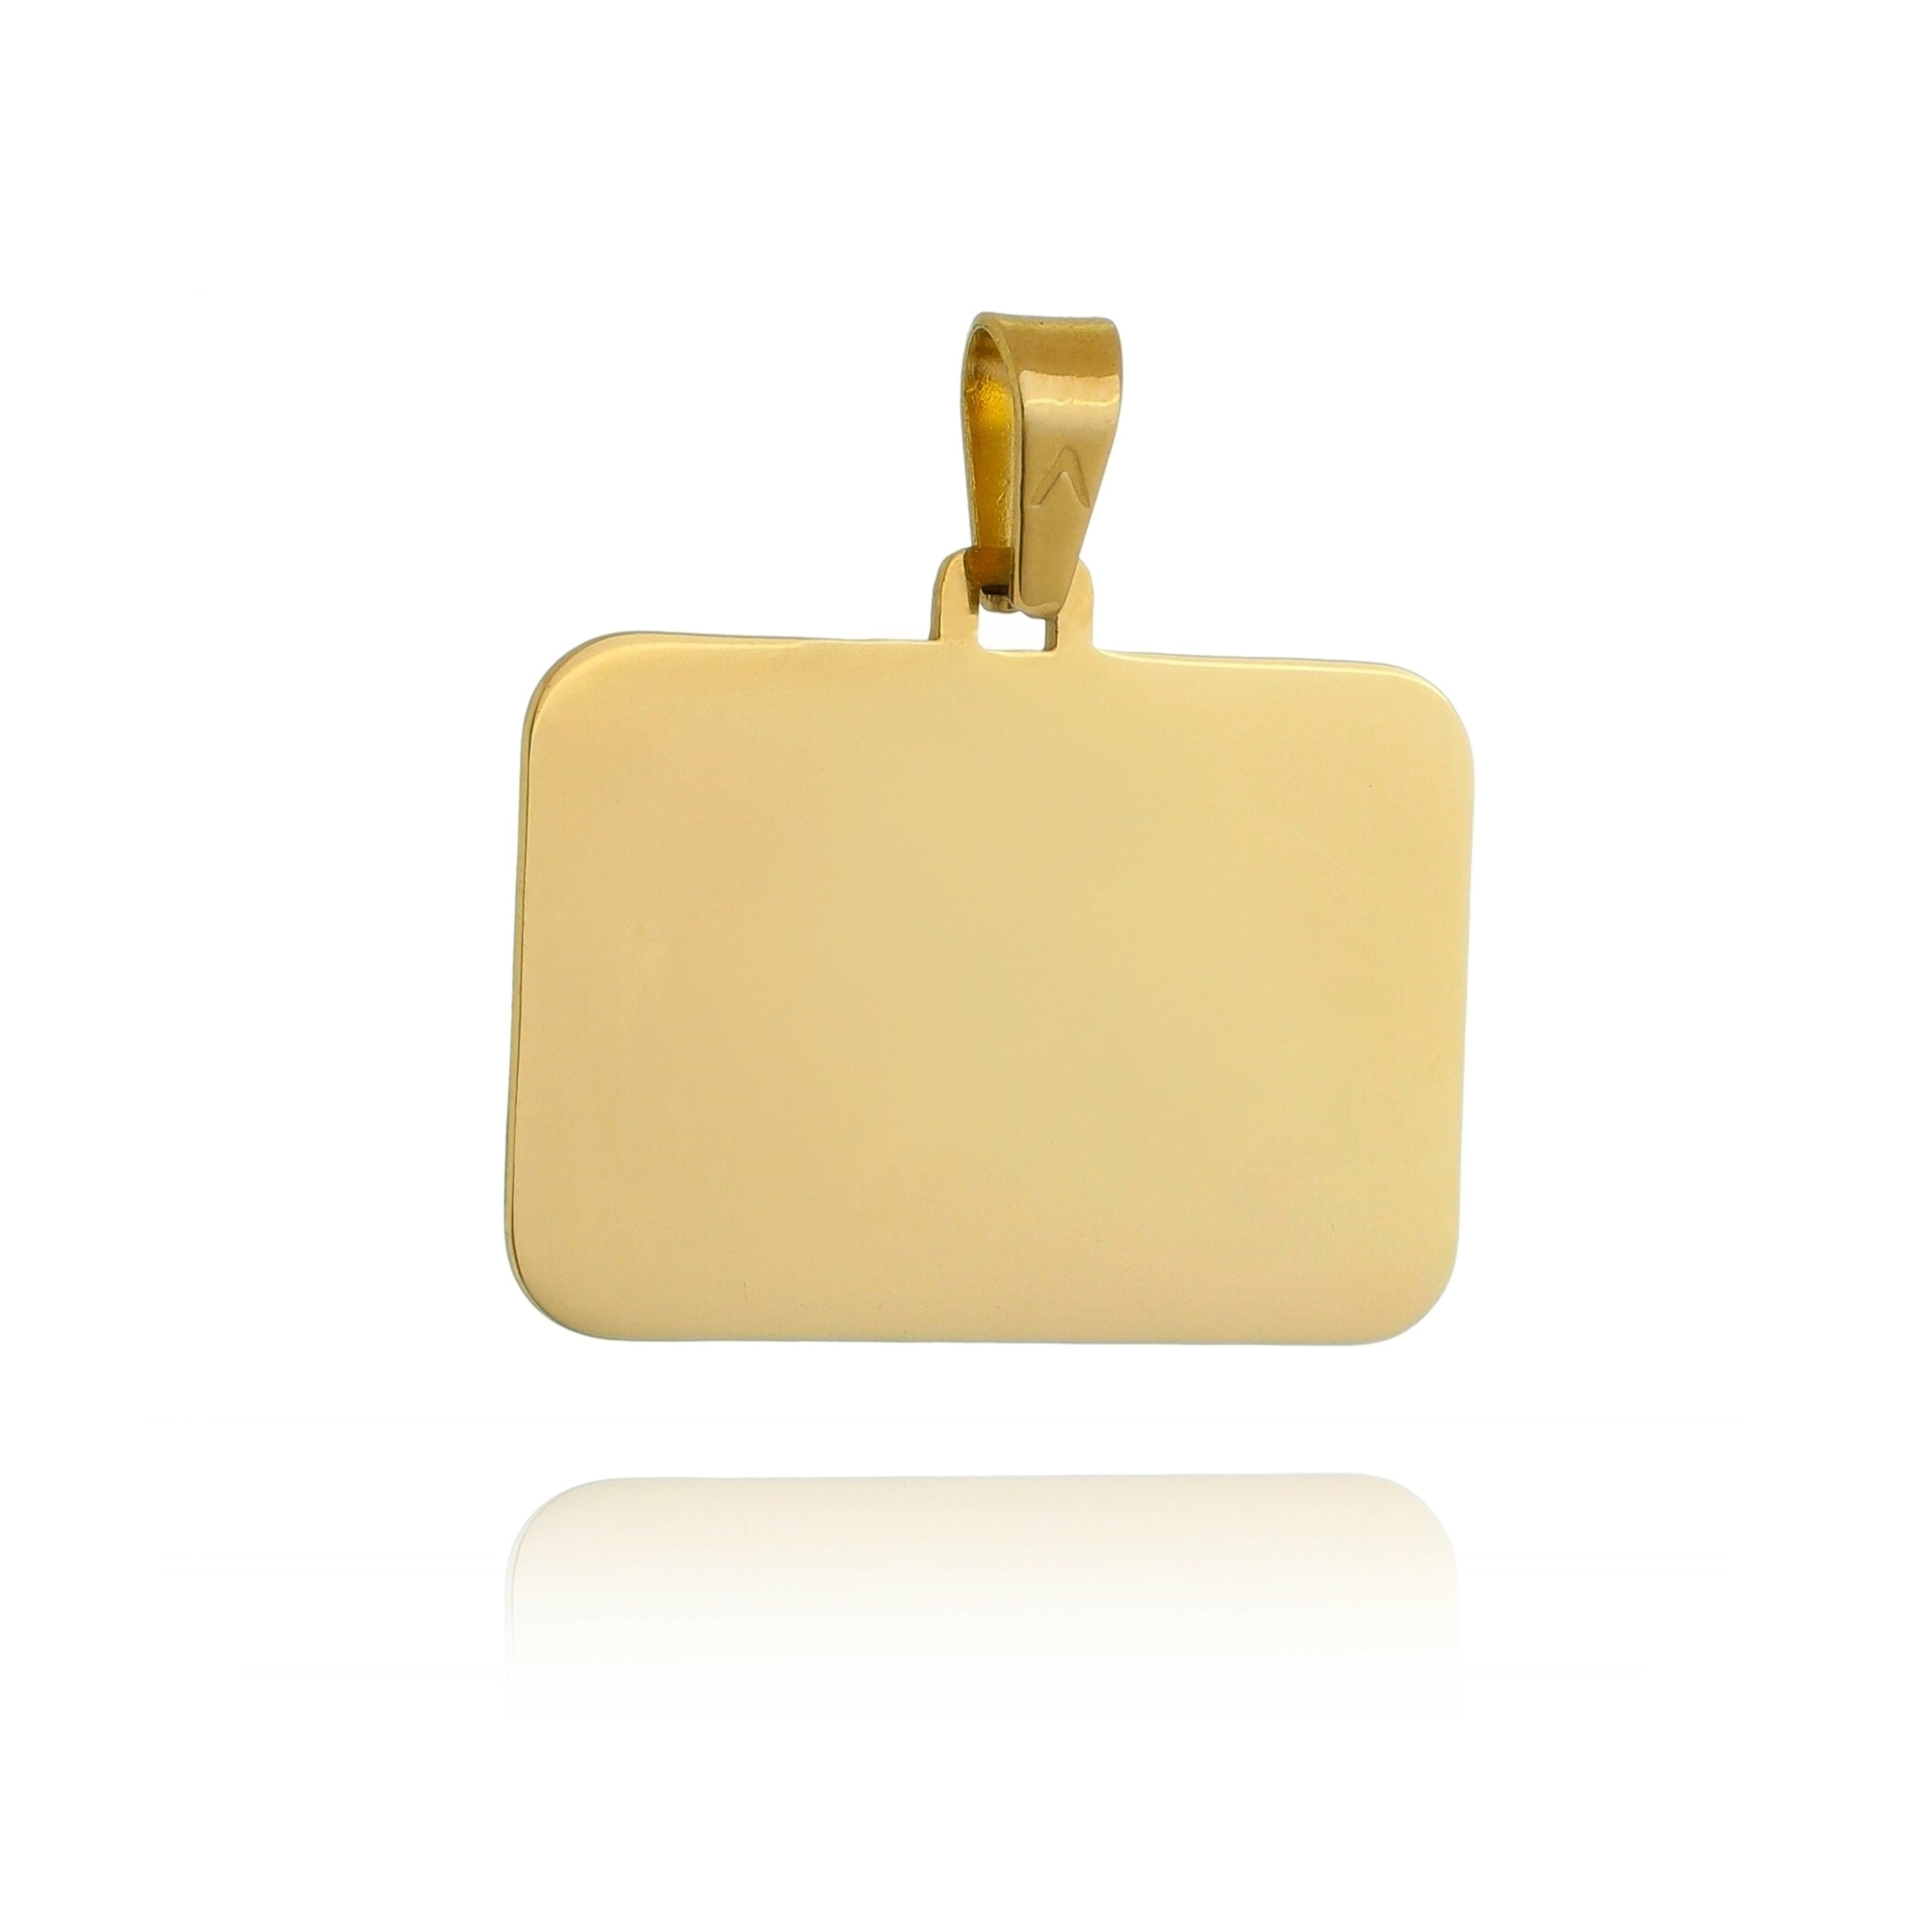 Stainless Steel Engravable Horizontal Rectangle Pendent - Basic. We offer in both Gold and Stainless Steel.